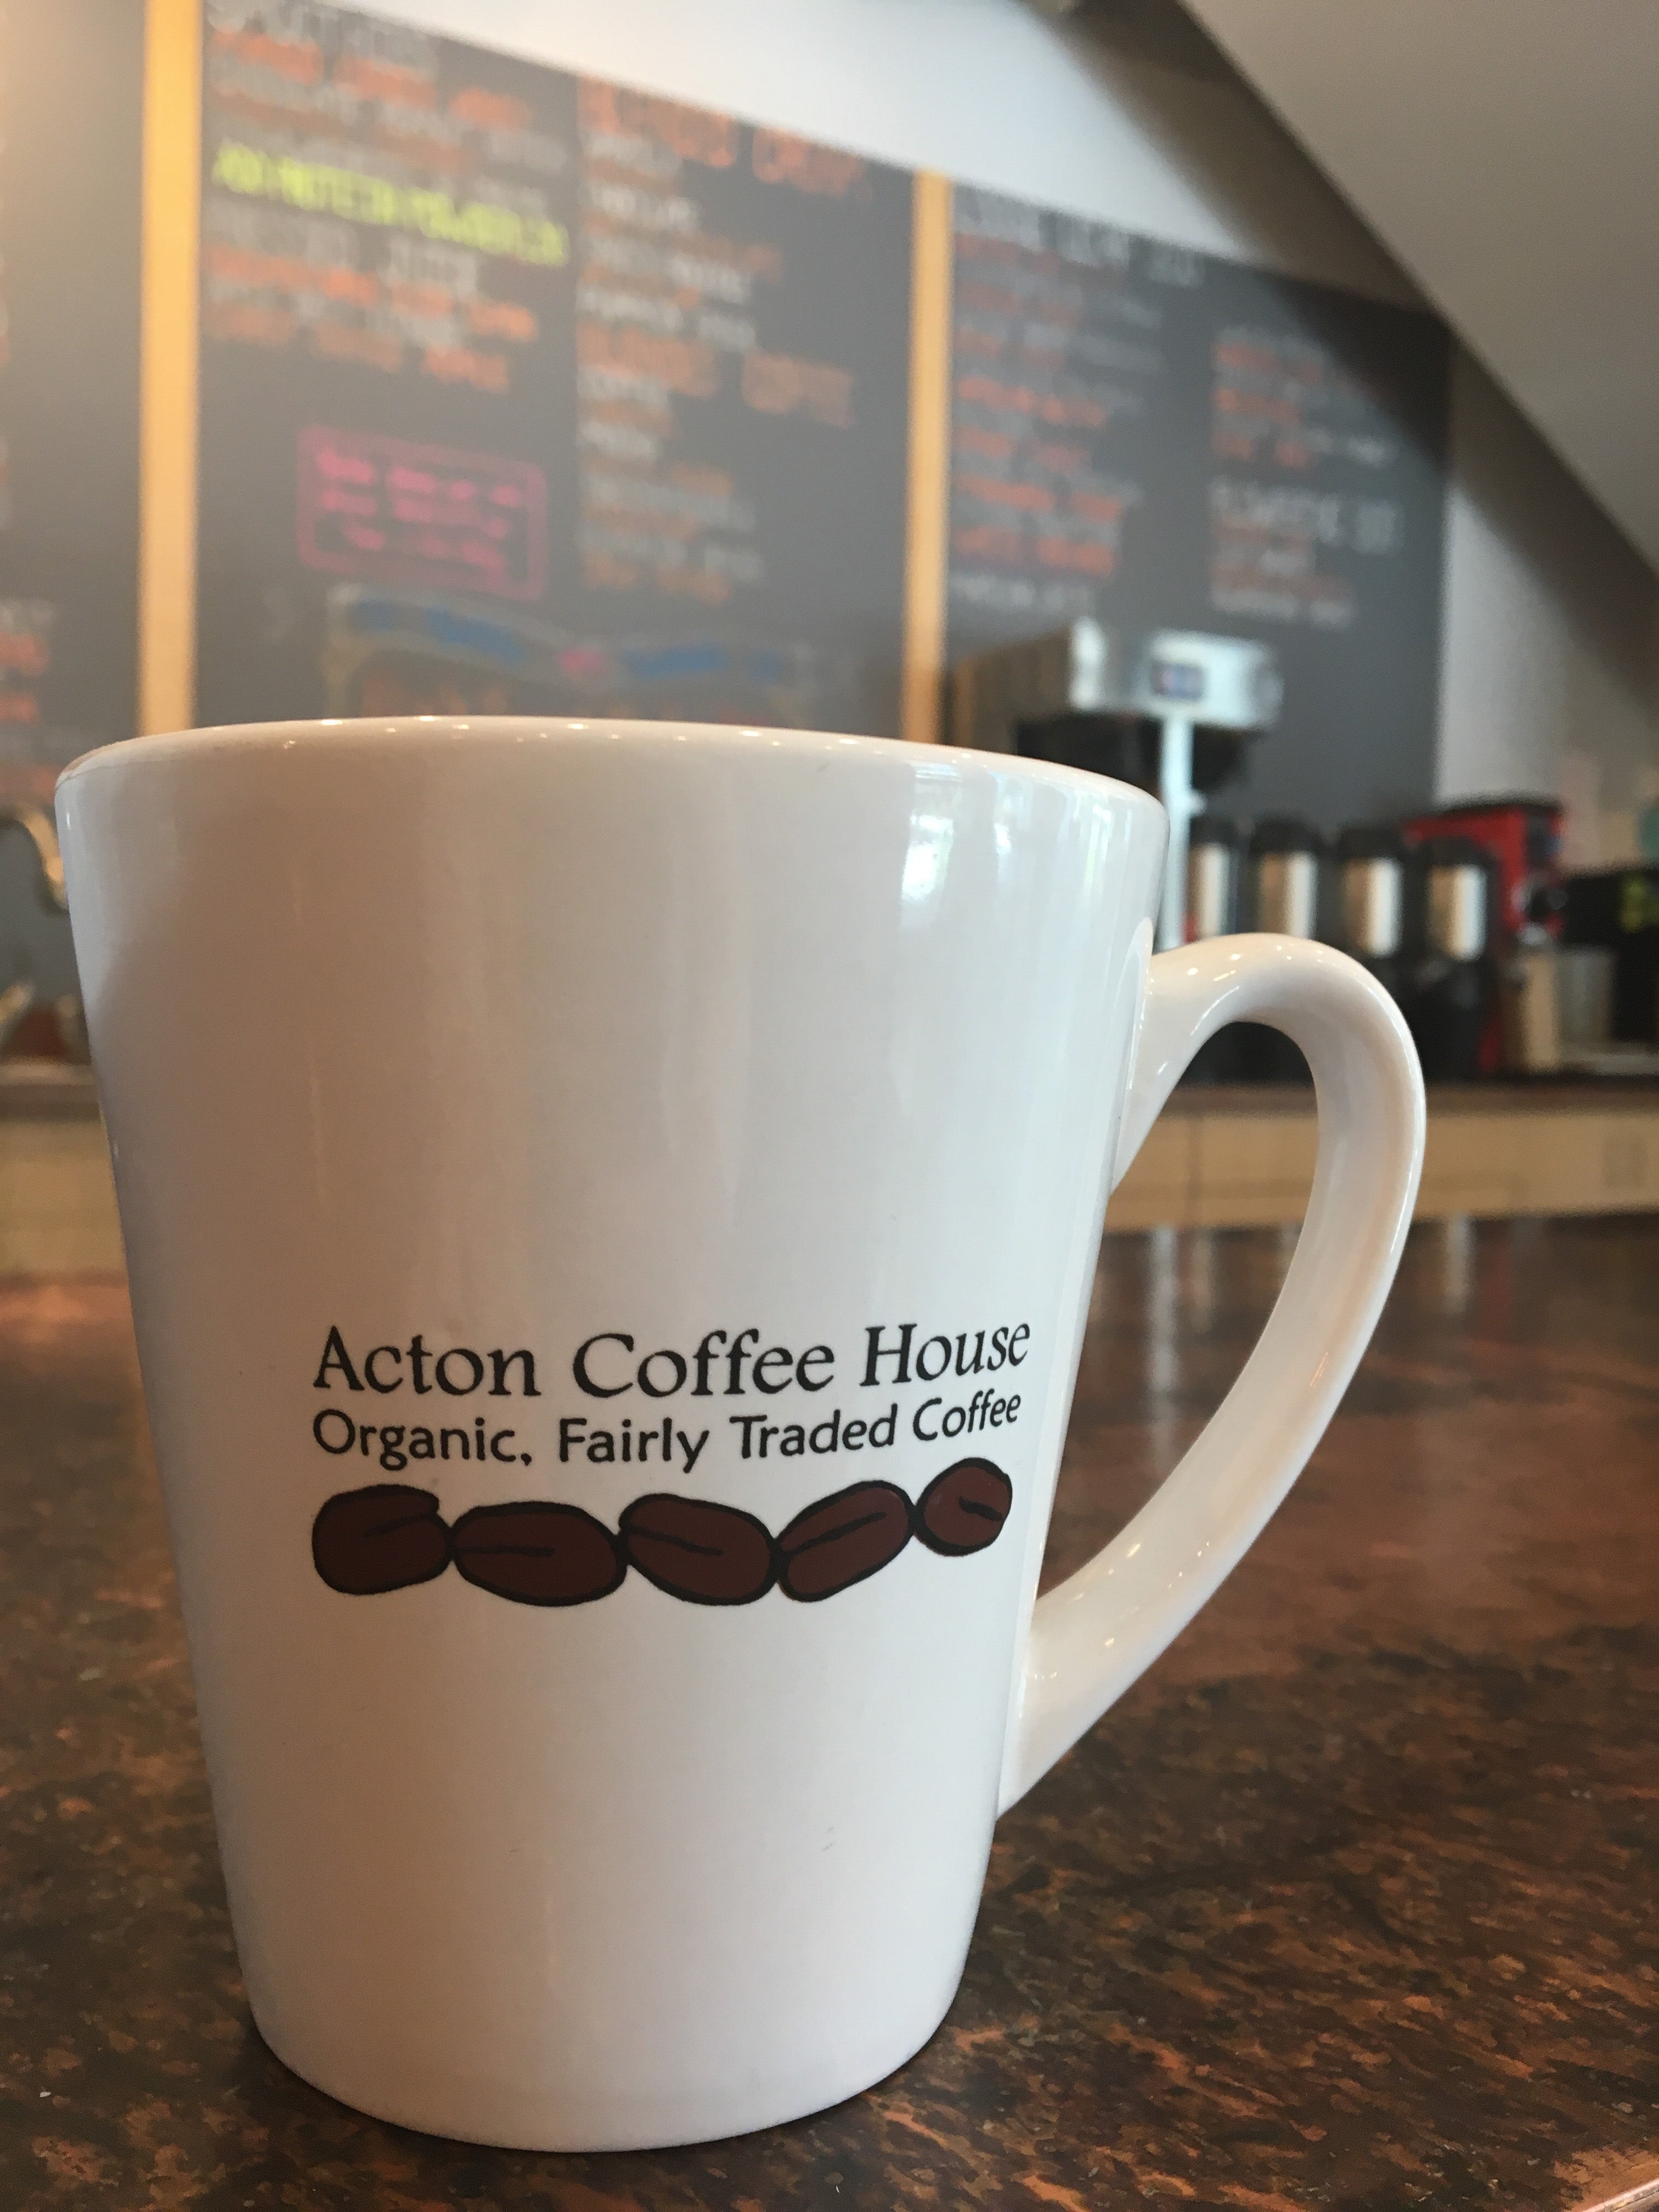 A coffee mug with the words "Acton Coffee House"